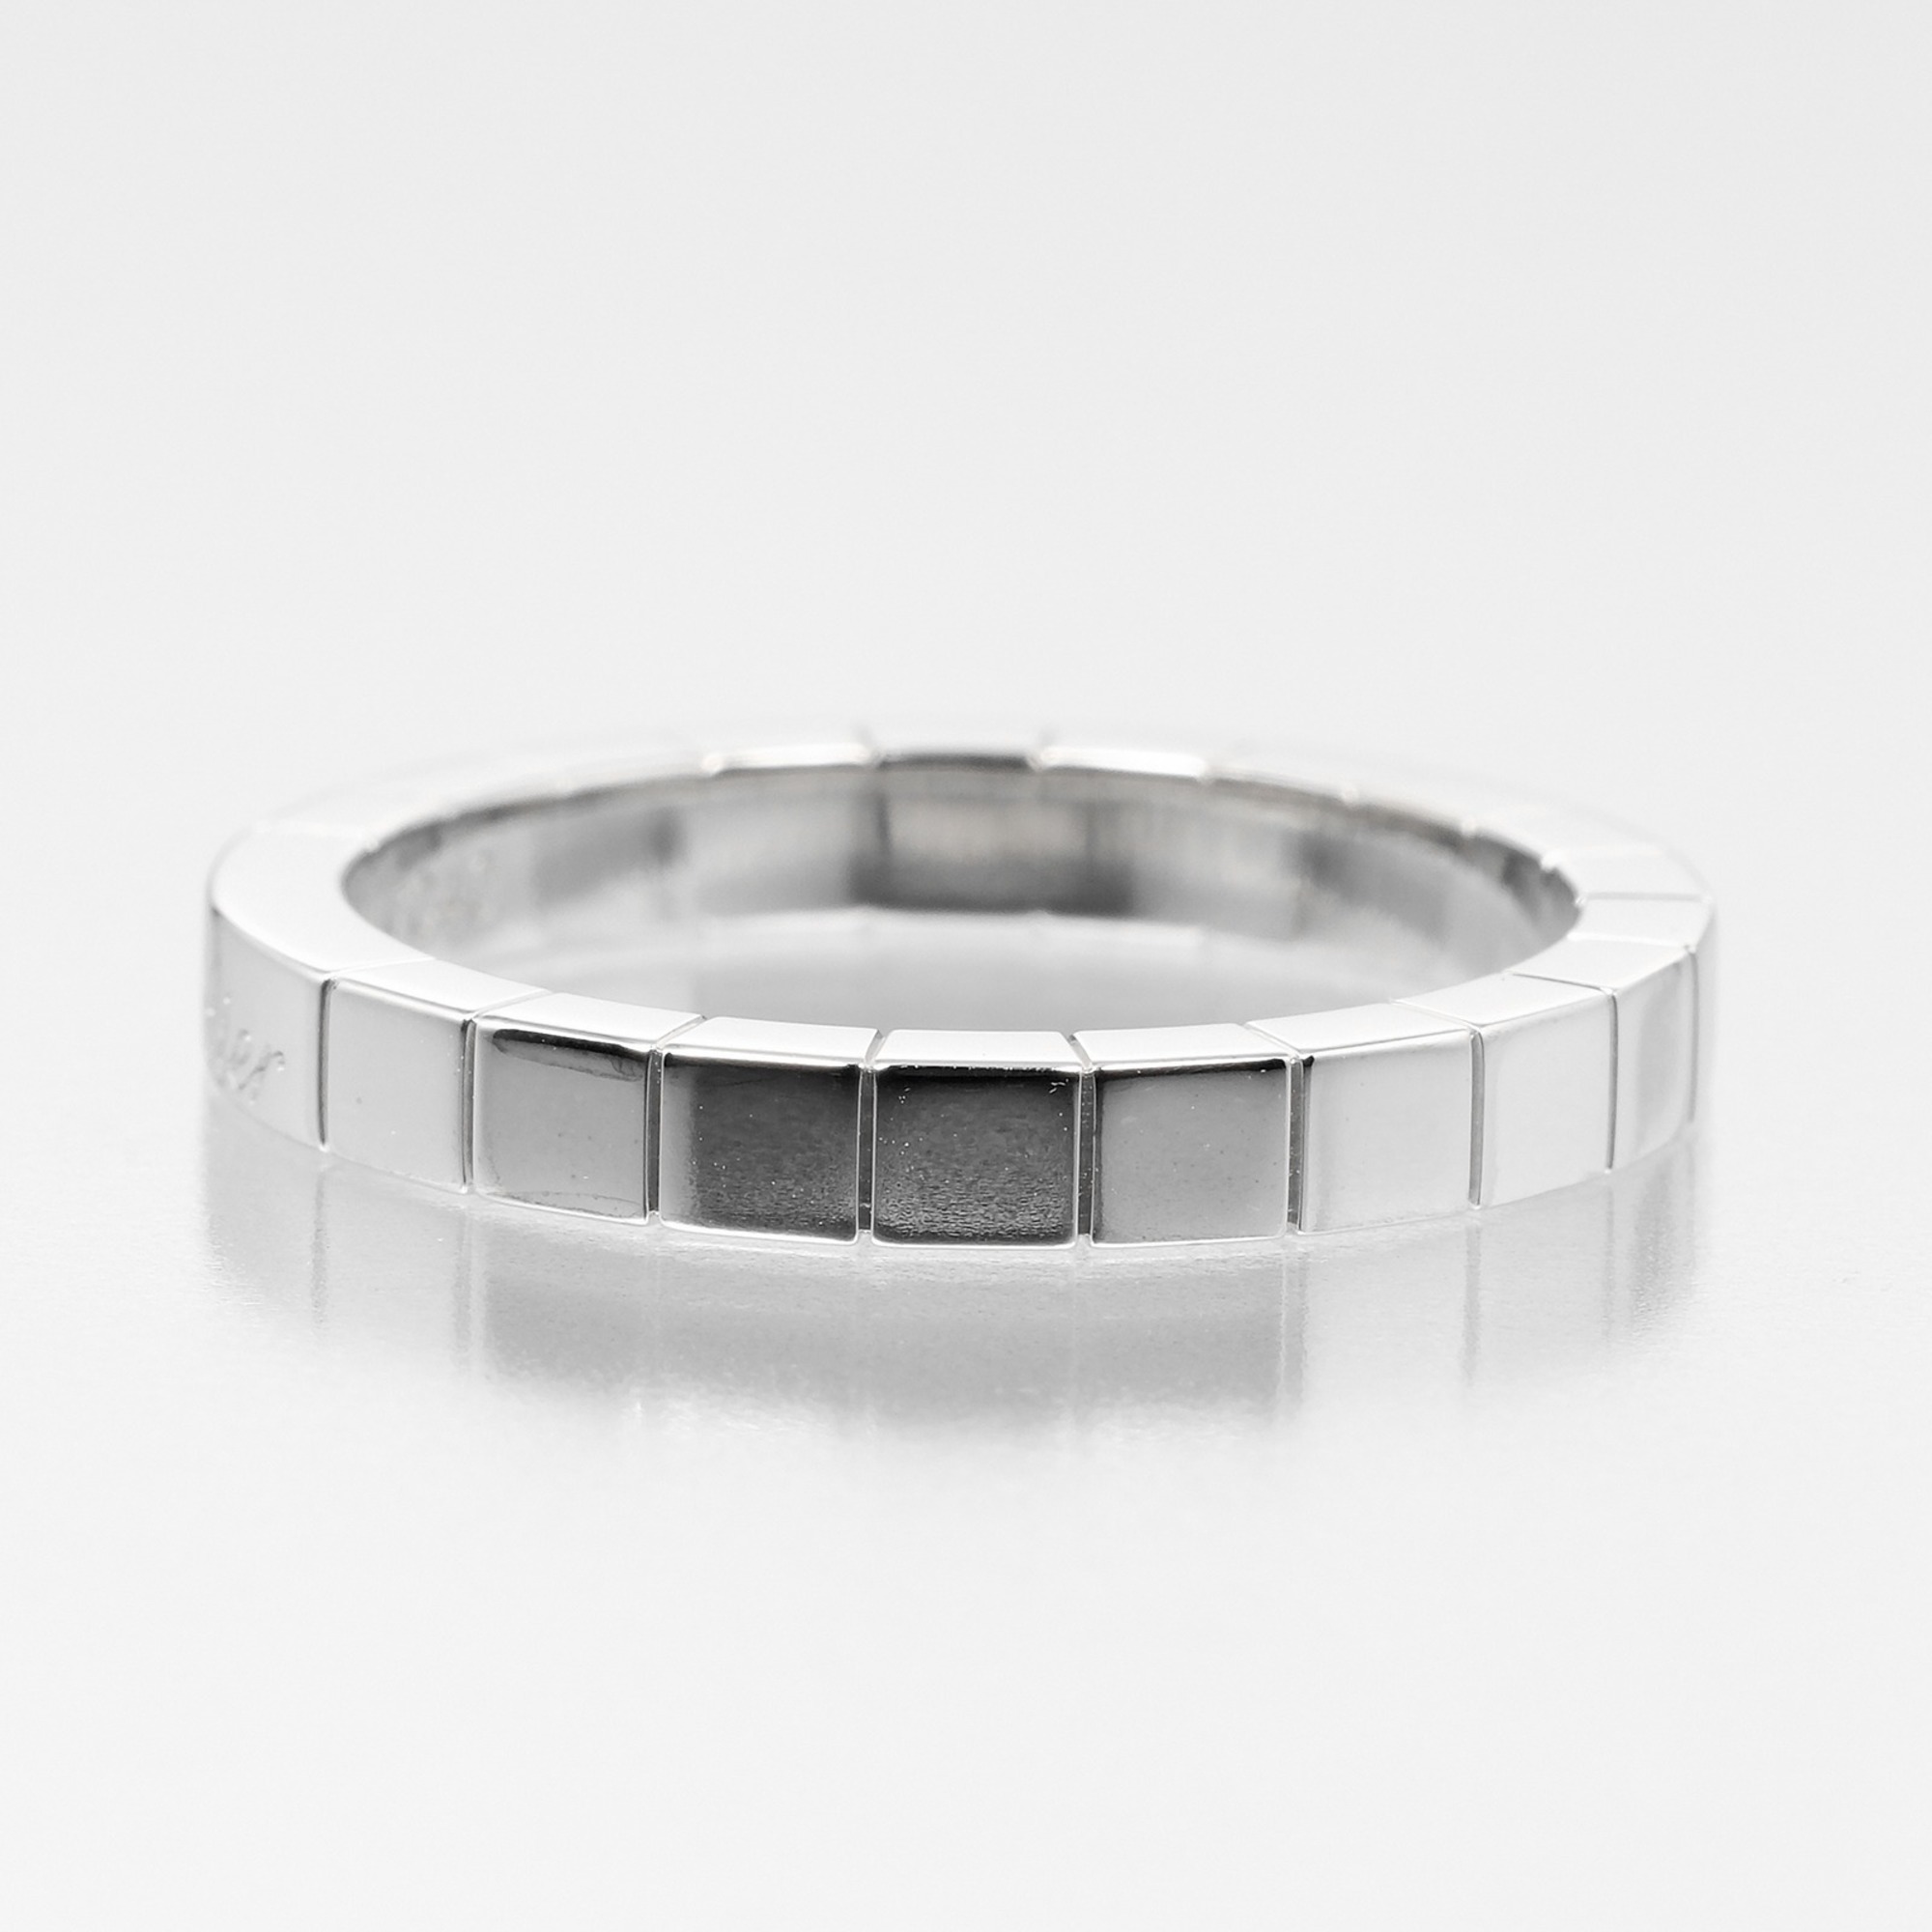 Cartier CARTIER Raniere No. 18 Ring K18 WG White Gold Approx. 6.73g I122924044